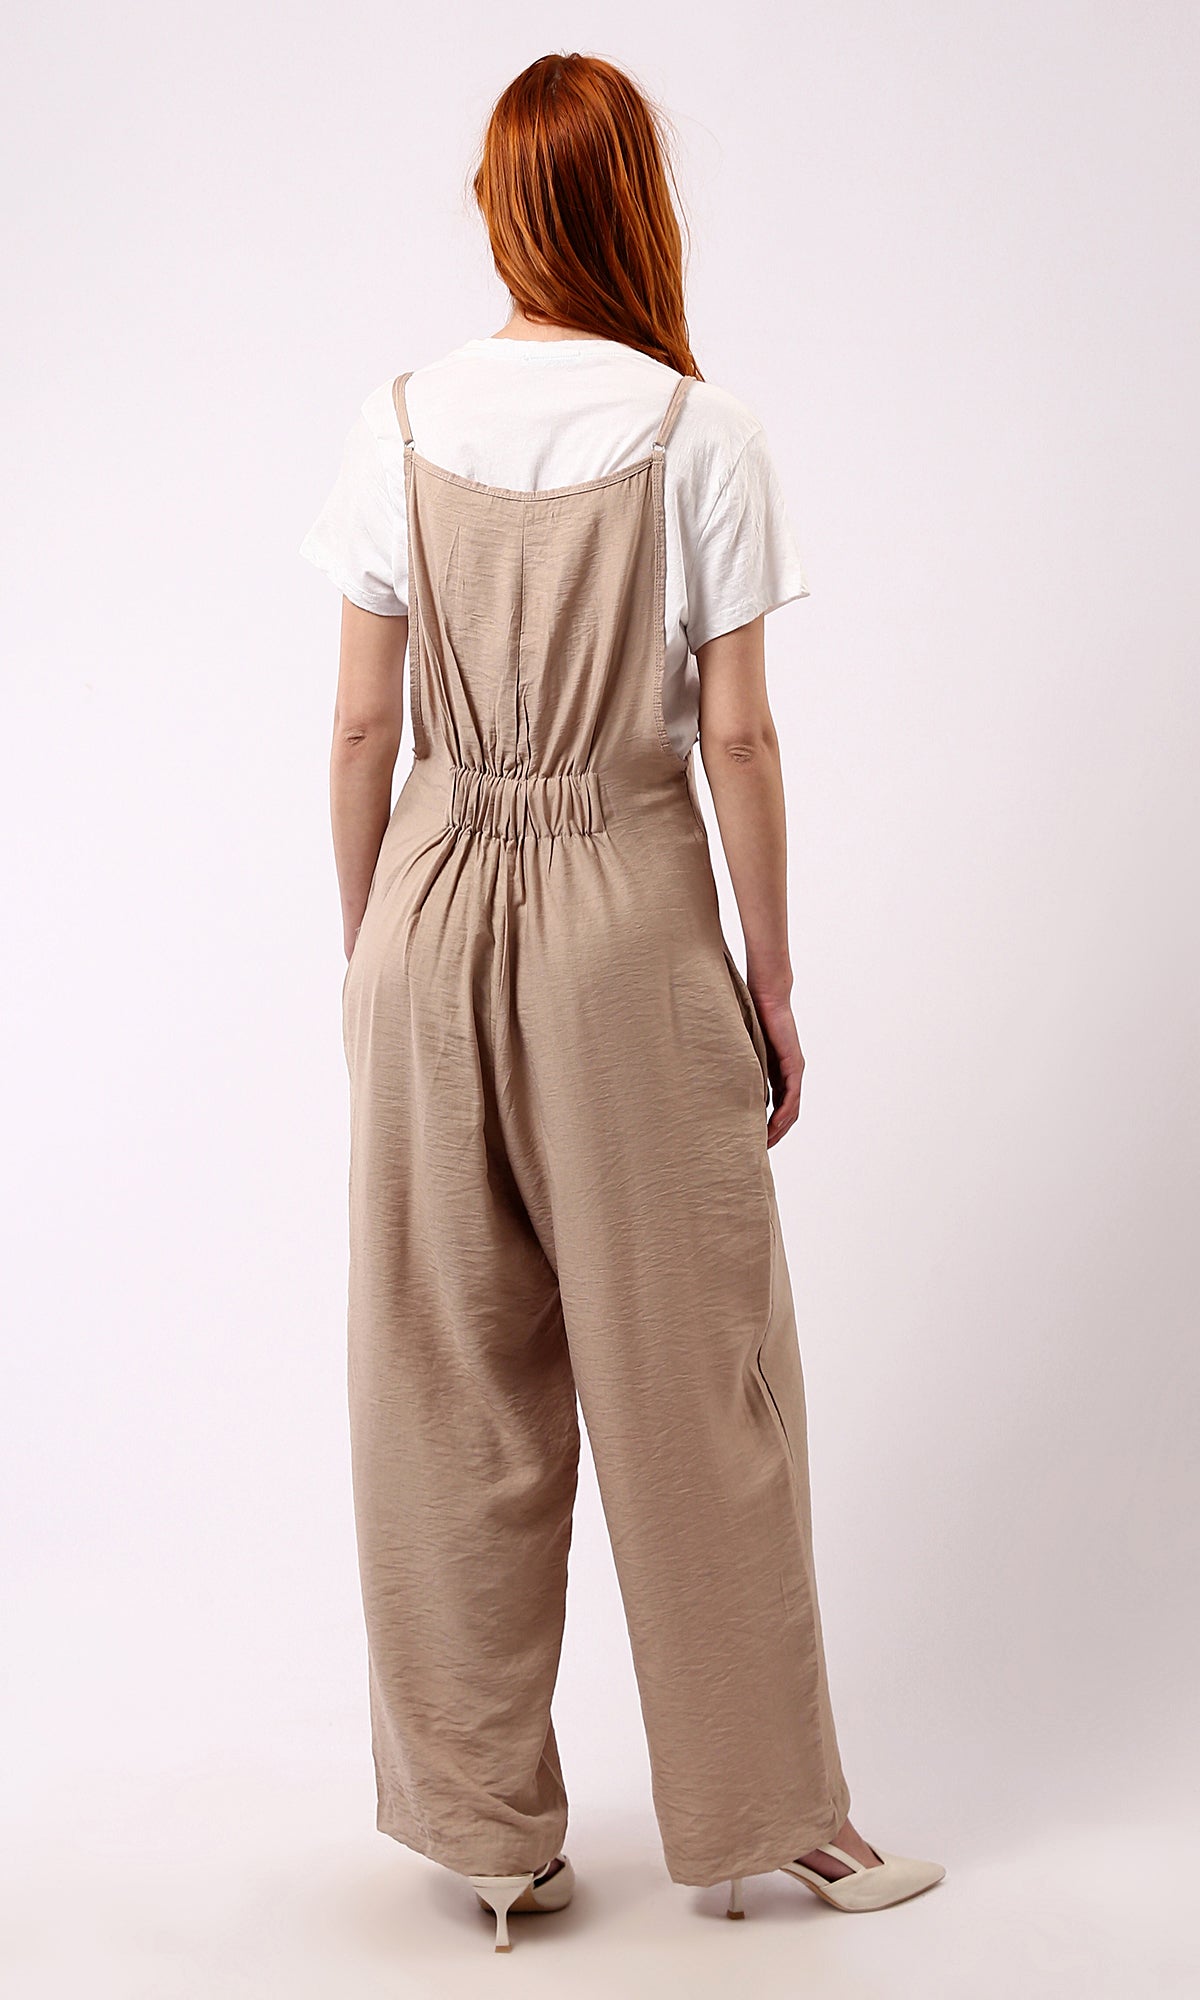 O181650 Square Neck Sleeveless Trendy Relaxed Jumpsuit - Light Coffee